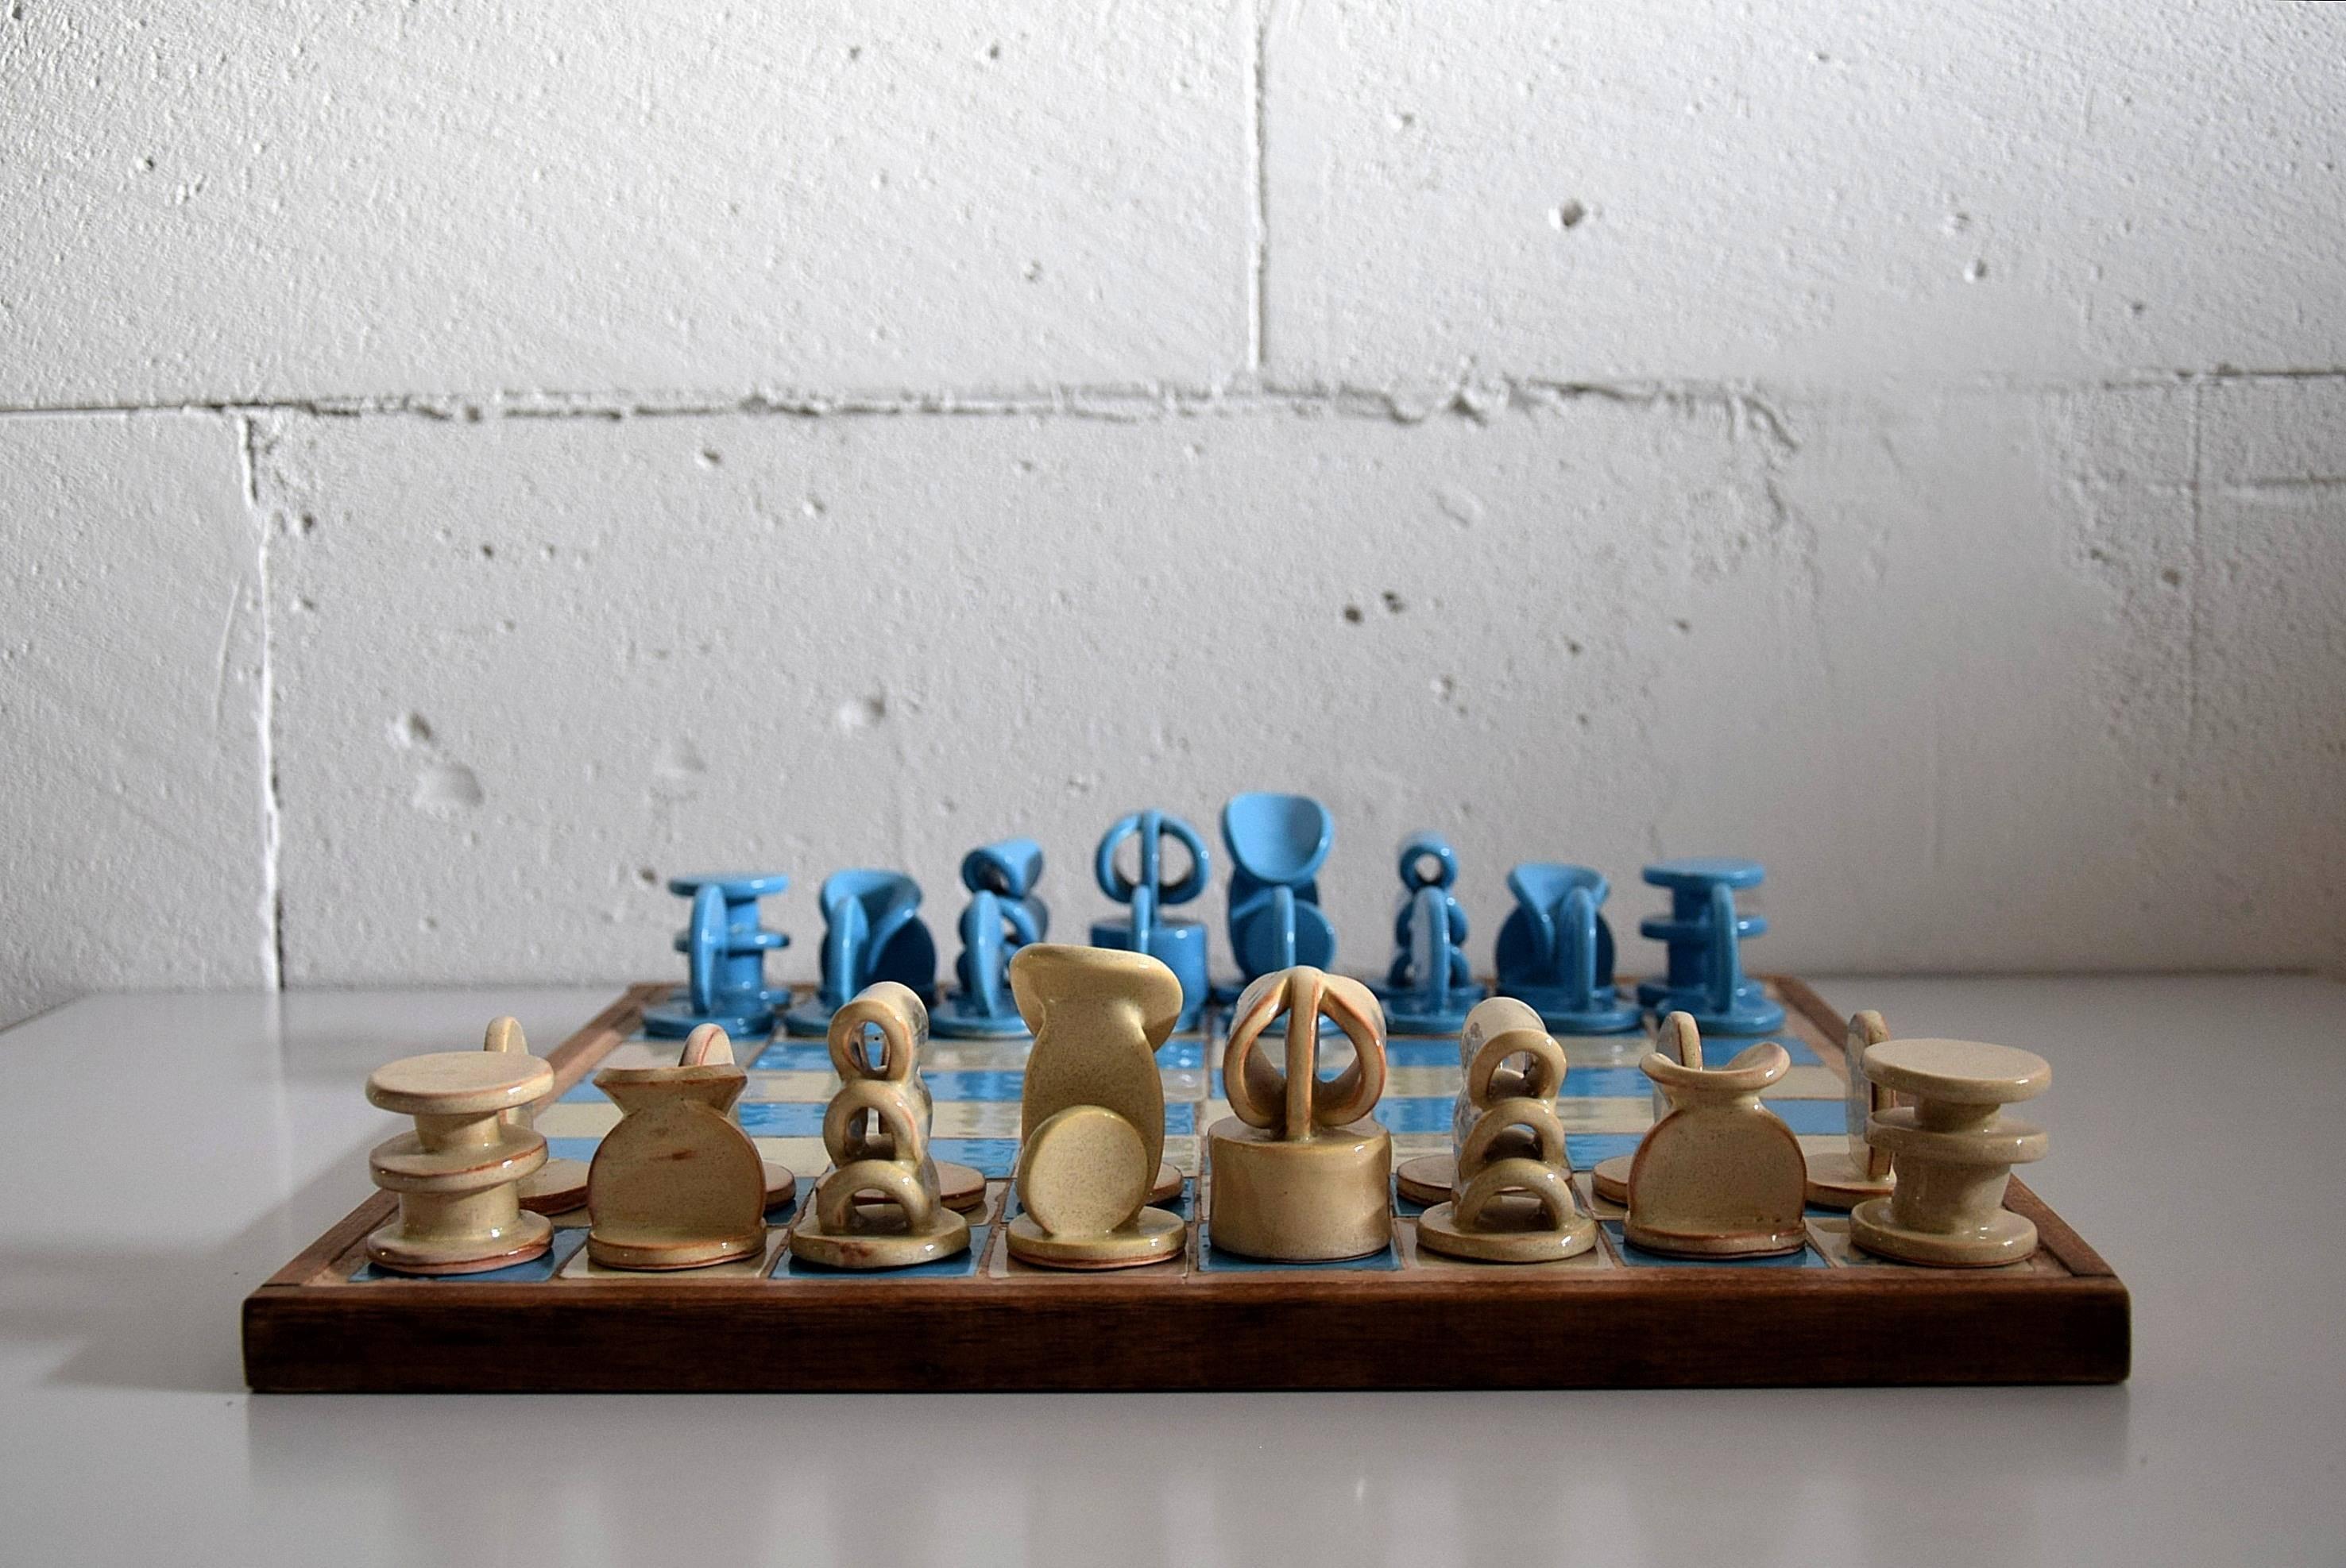 Rare ceramic Mid-Century Modern French chess set

Beautiful celeste and sand colored ceramic set from l'Argille, known for it's ceramic culture.

Measurements: W.37 x D.37 x H.8 cm.

This rare set is in fantastic condition as can be seen in